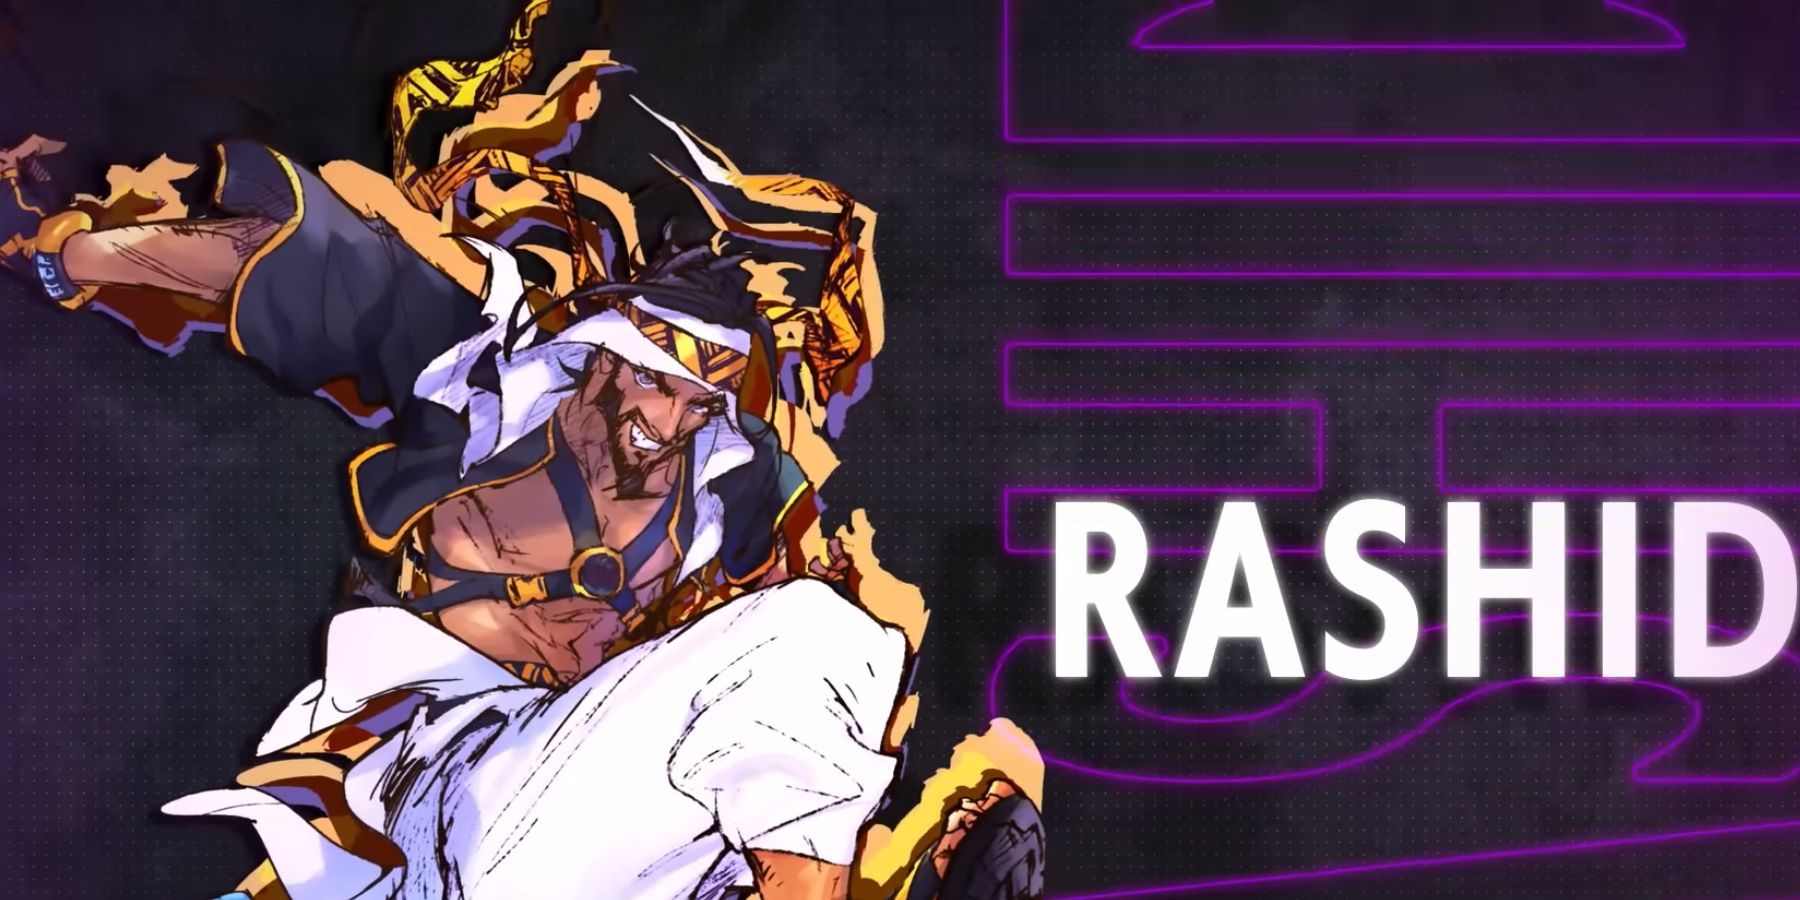 image showing rashid the year-one dlc character in street fighter 6.